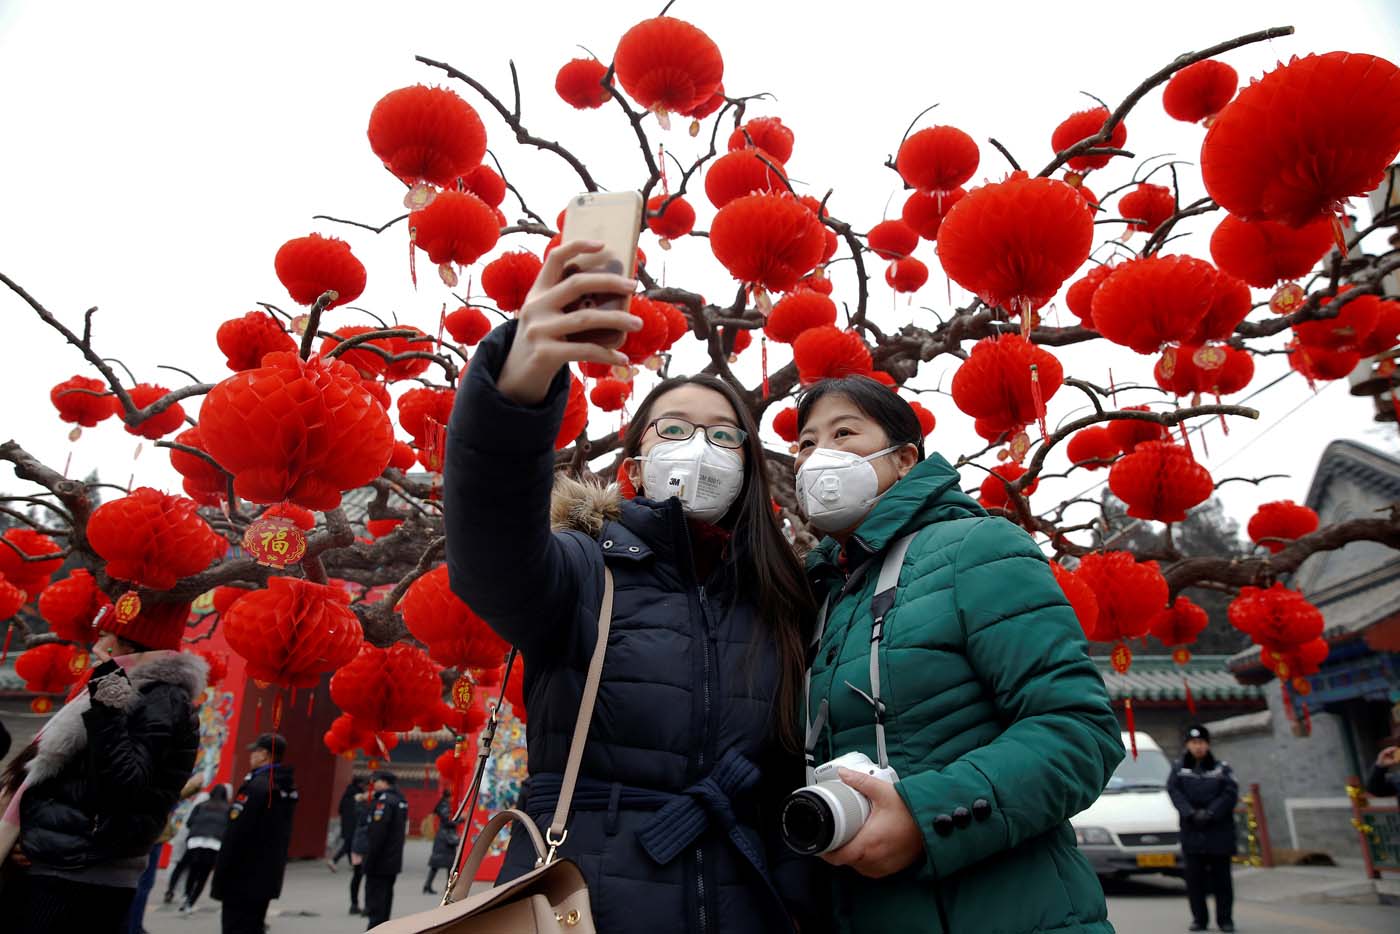 Visitors wearing face masks against pollution take pictures of themselves at the temple fair at Ditan Park (the Temple of Earth) as the Lunar New Year of the Rooster is celebrated, in Beijing, China January 28, 2017. REUTERS/Damir Sagolj